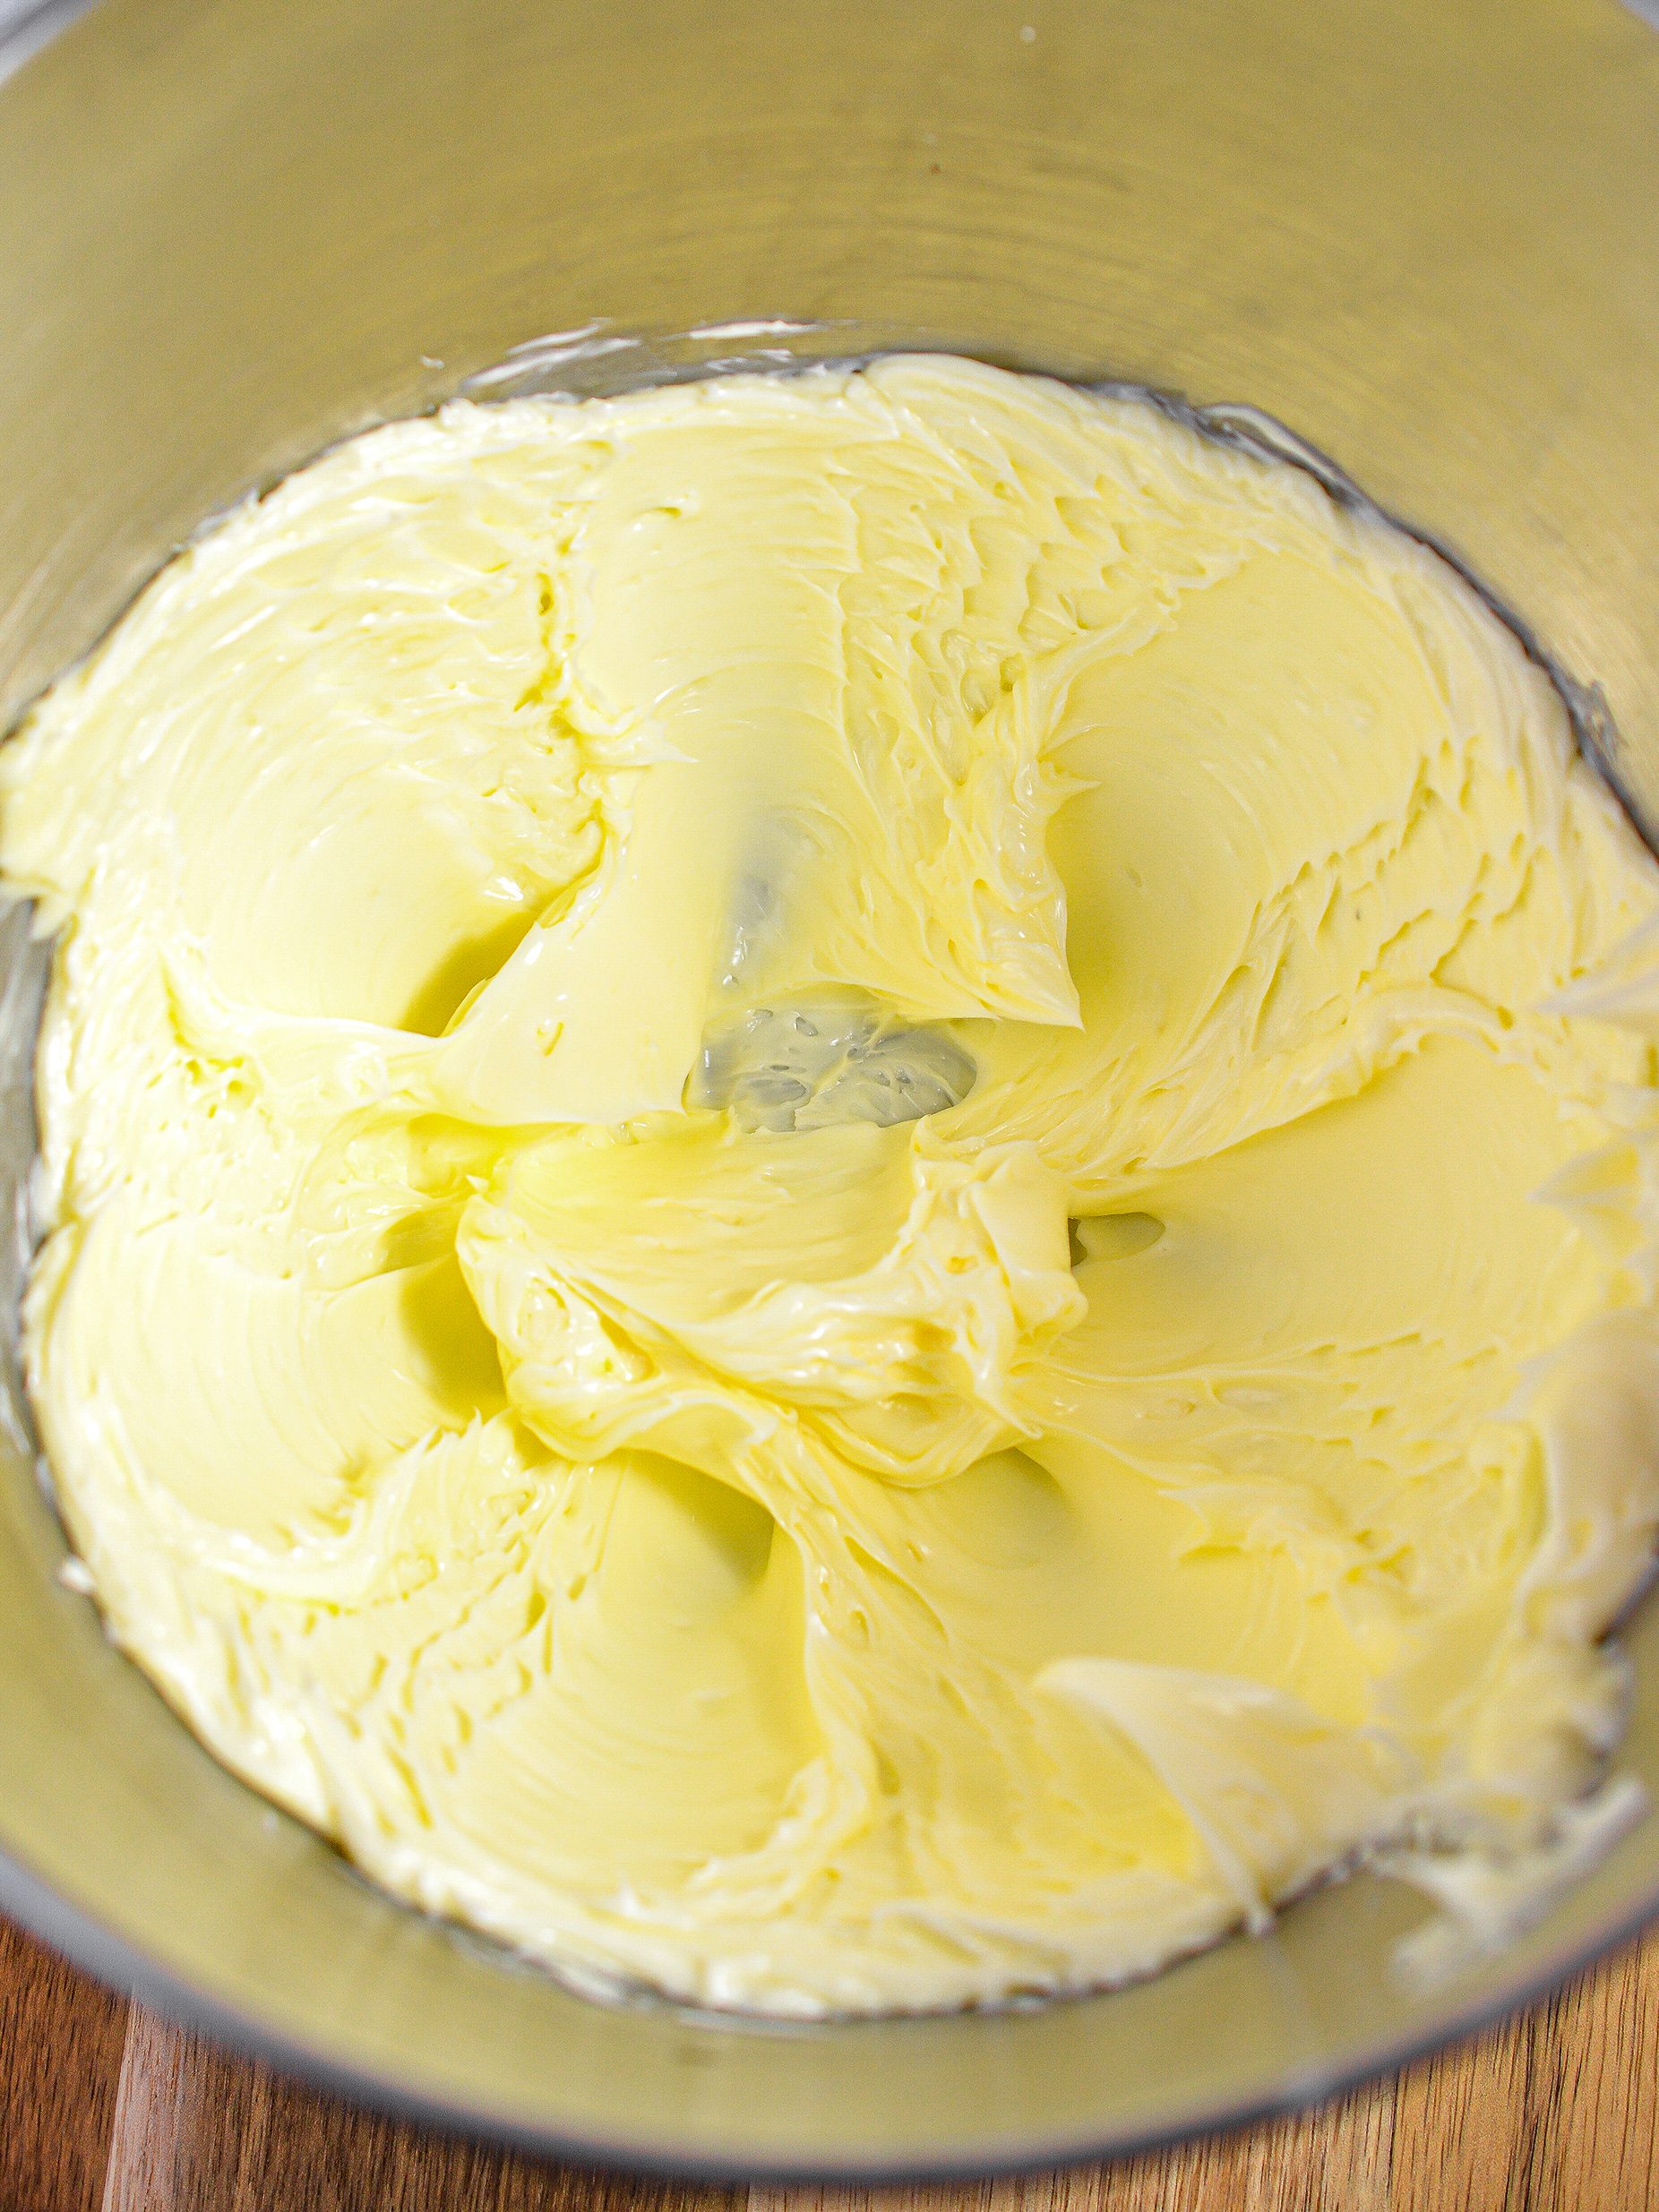 This is the texture that butter should have.